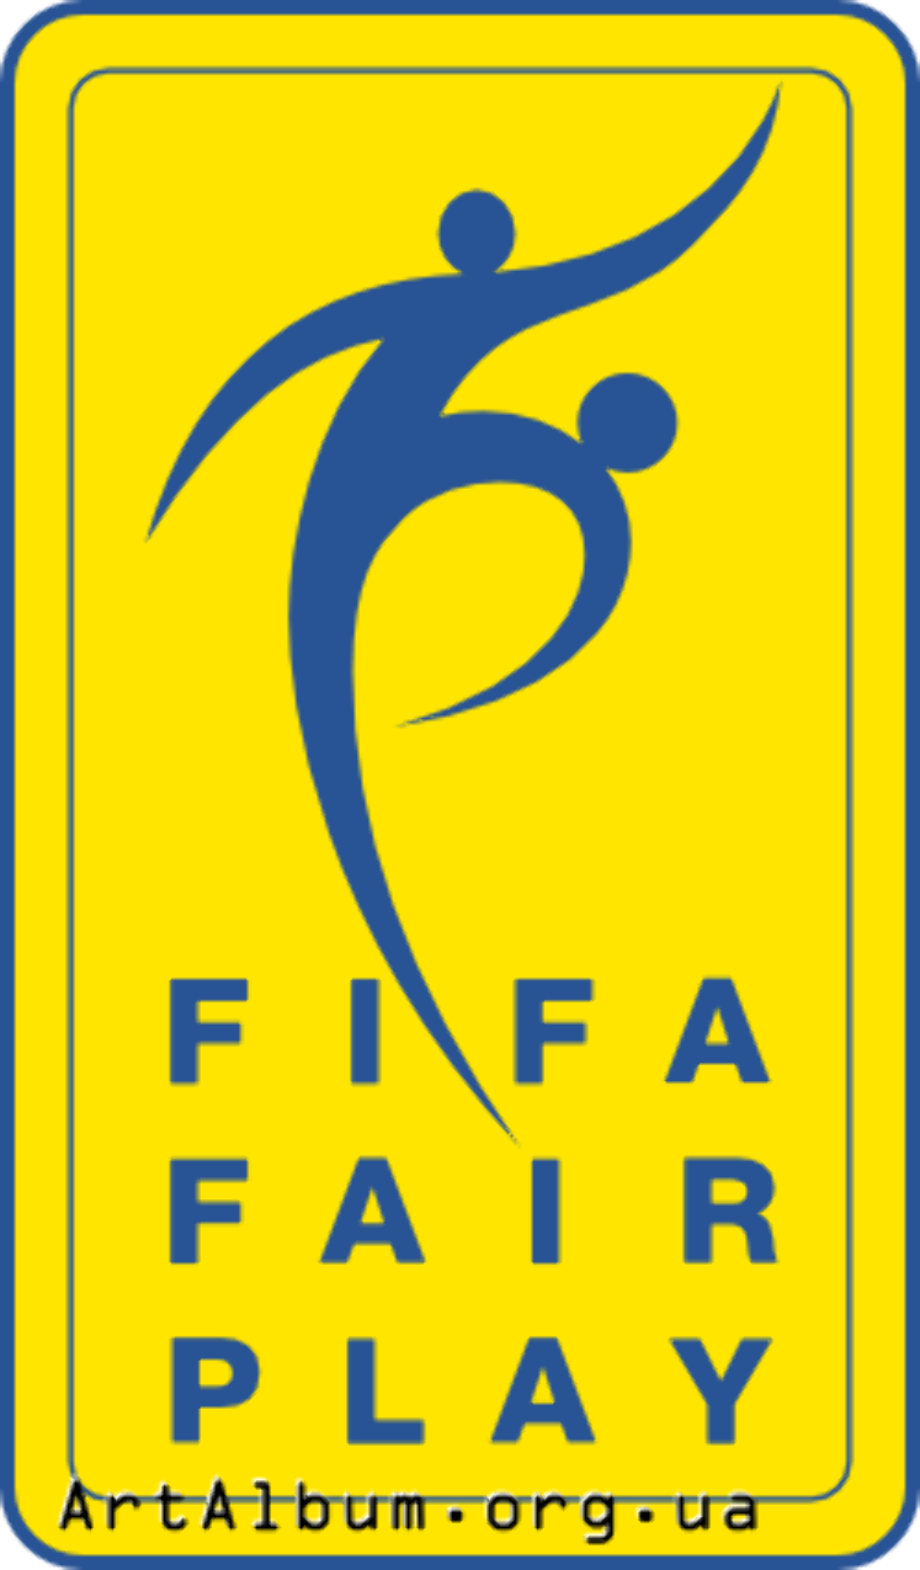 Download High Quality fifa logo fair play Transparent PNG Images - Art